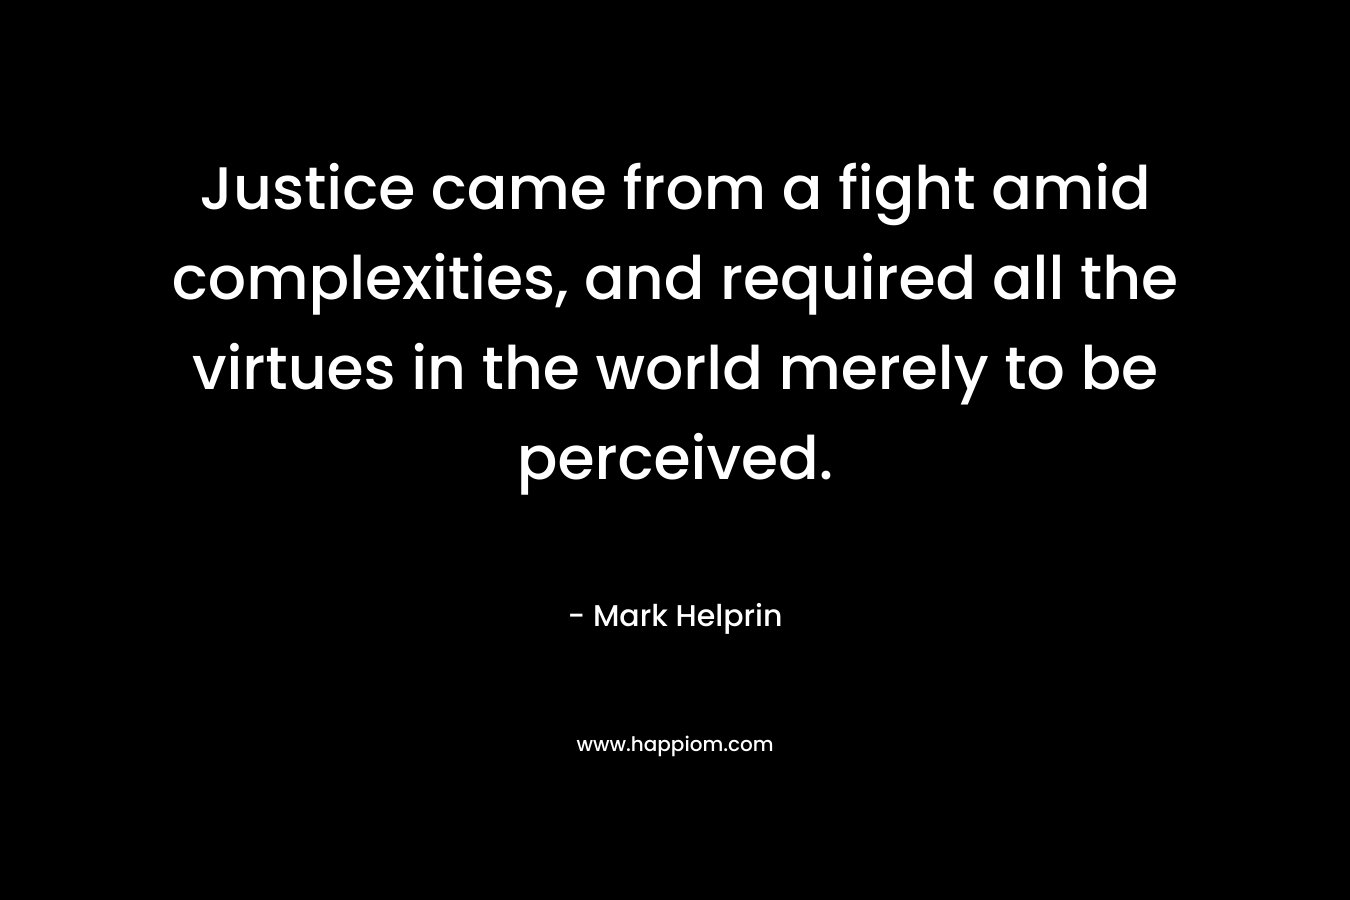 Justice came from a fight amid complexities, and required all the virtues in the world merely to be perceived.